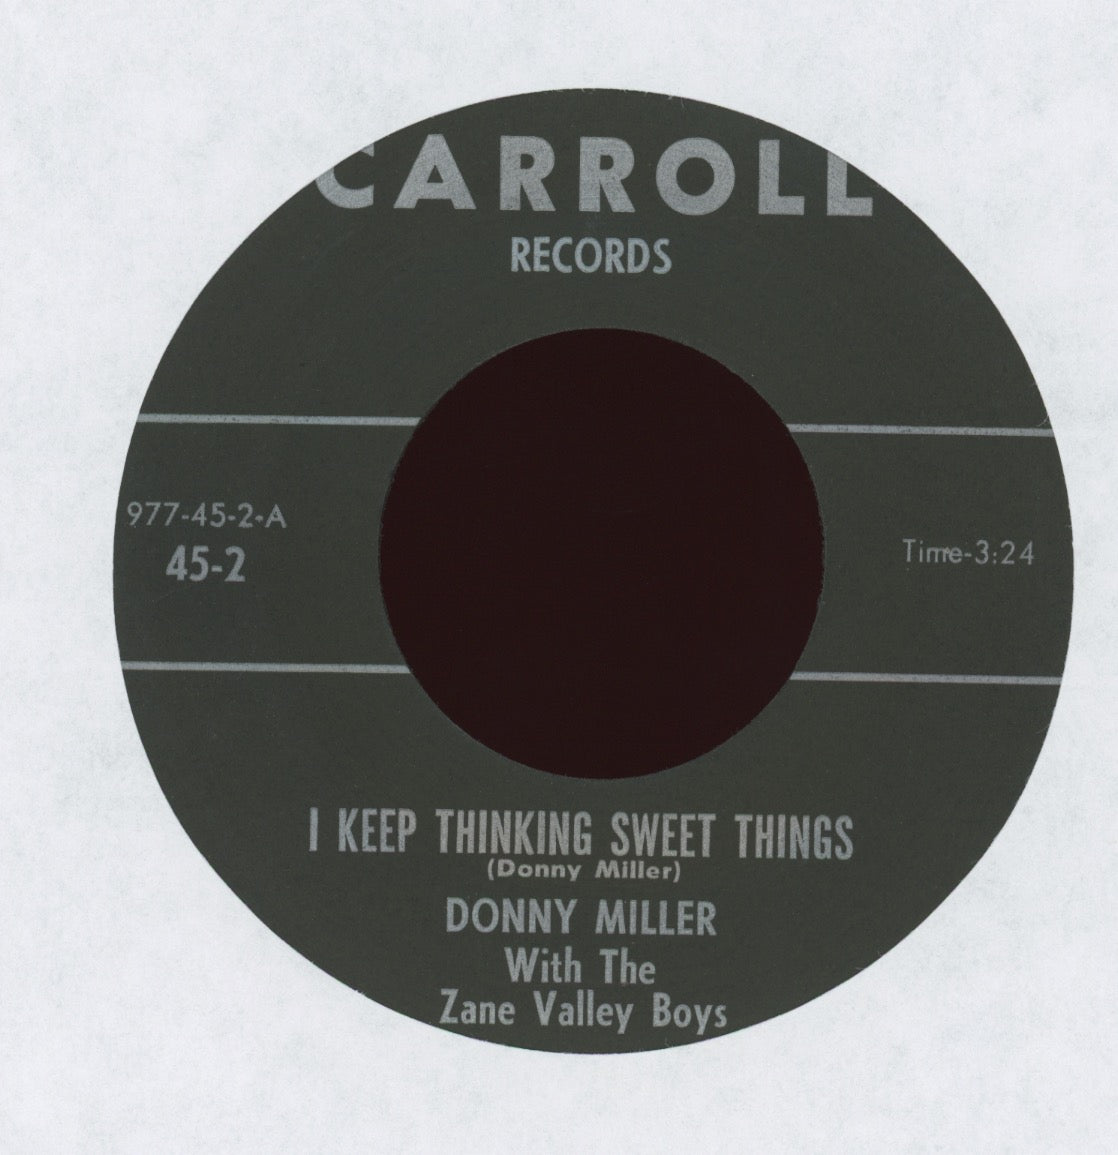 Donny Miller - Alone With You on Carroll